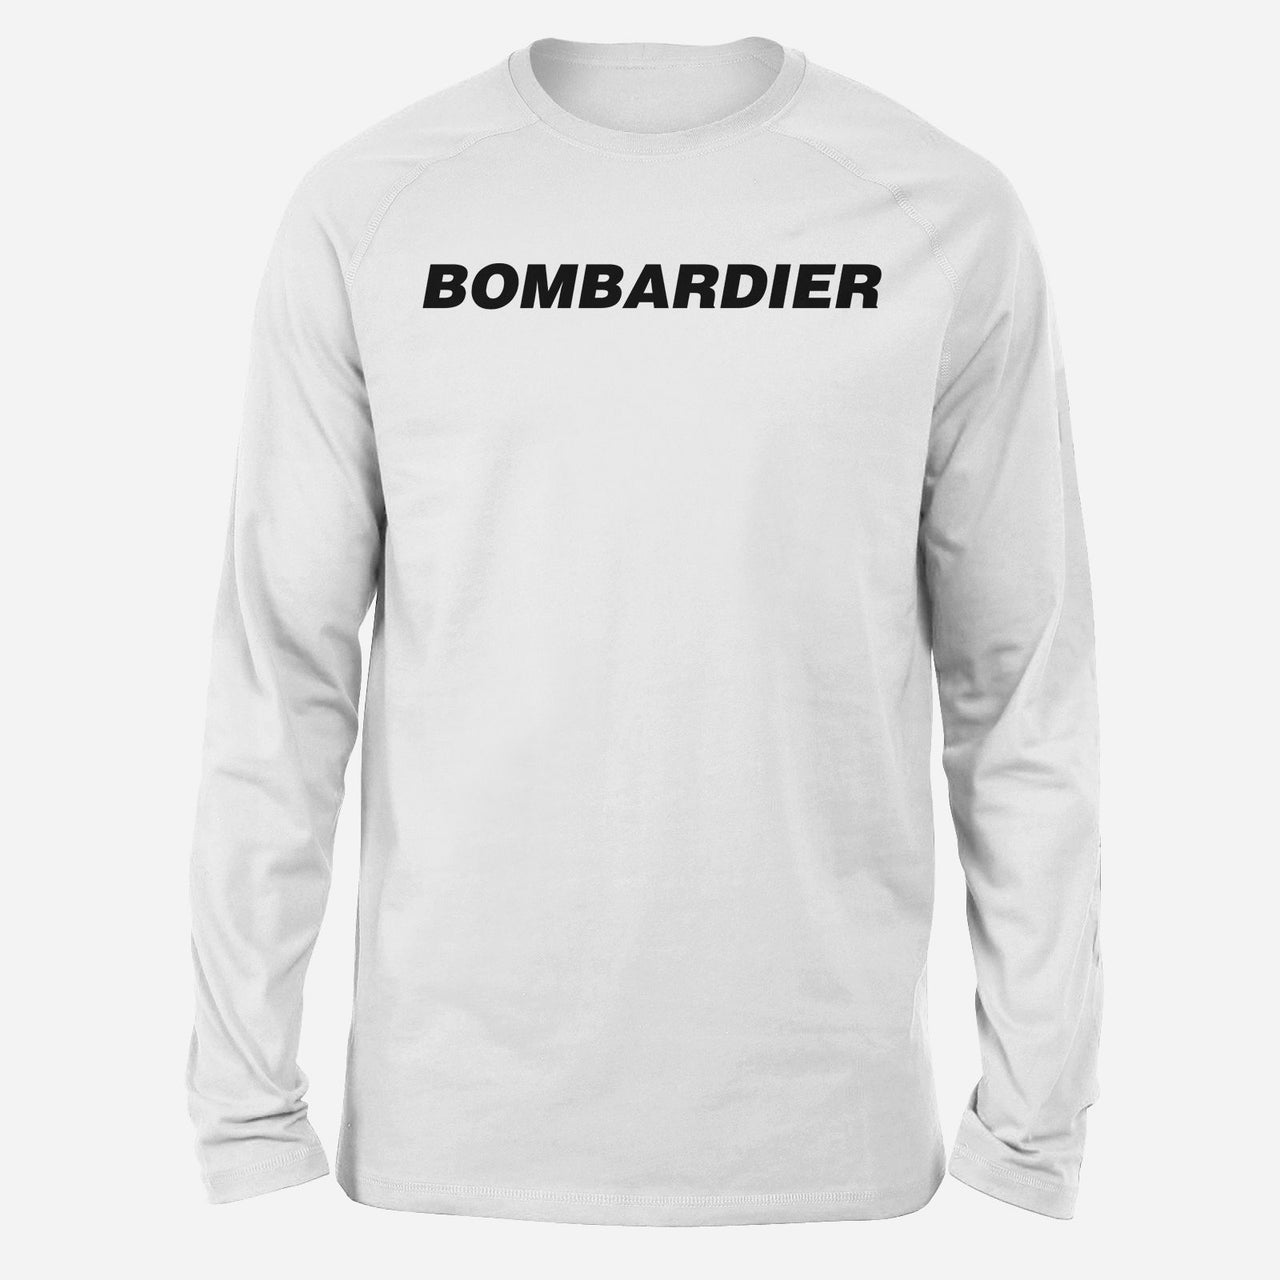 Bombardier & Text Designed Long-Sleeve T-Shirts